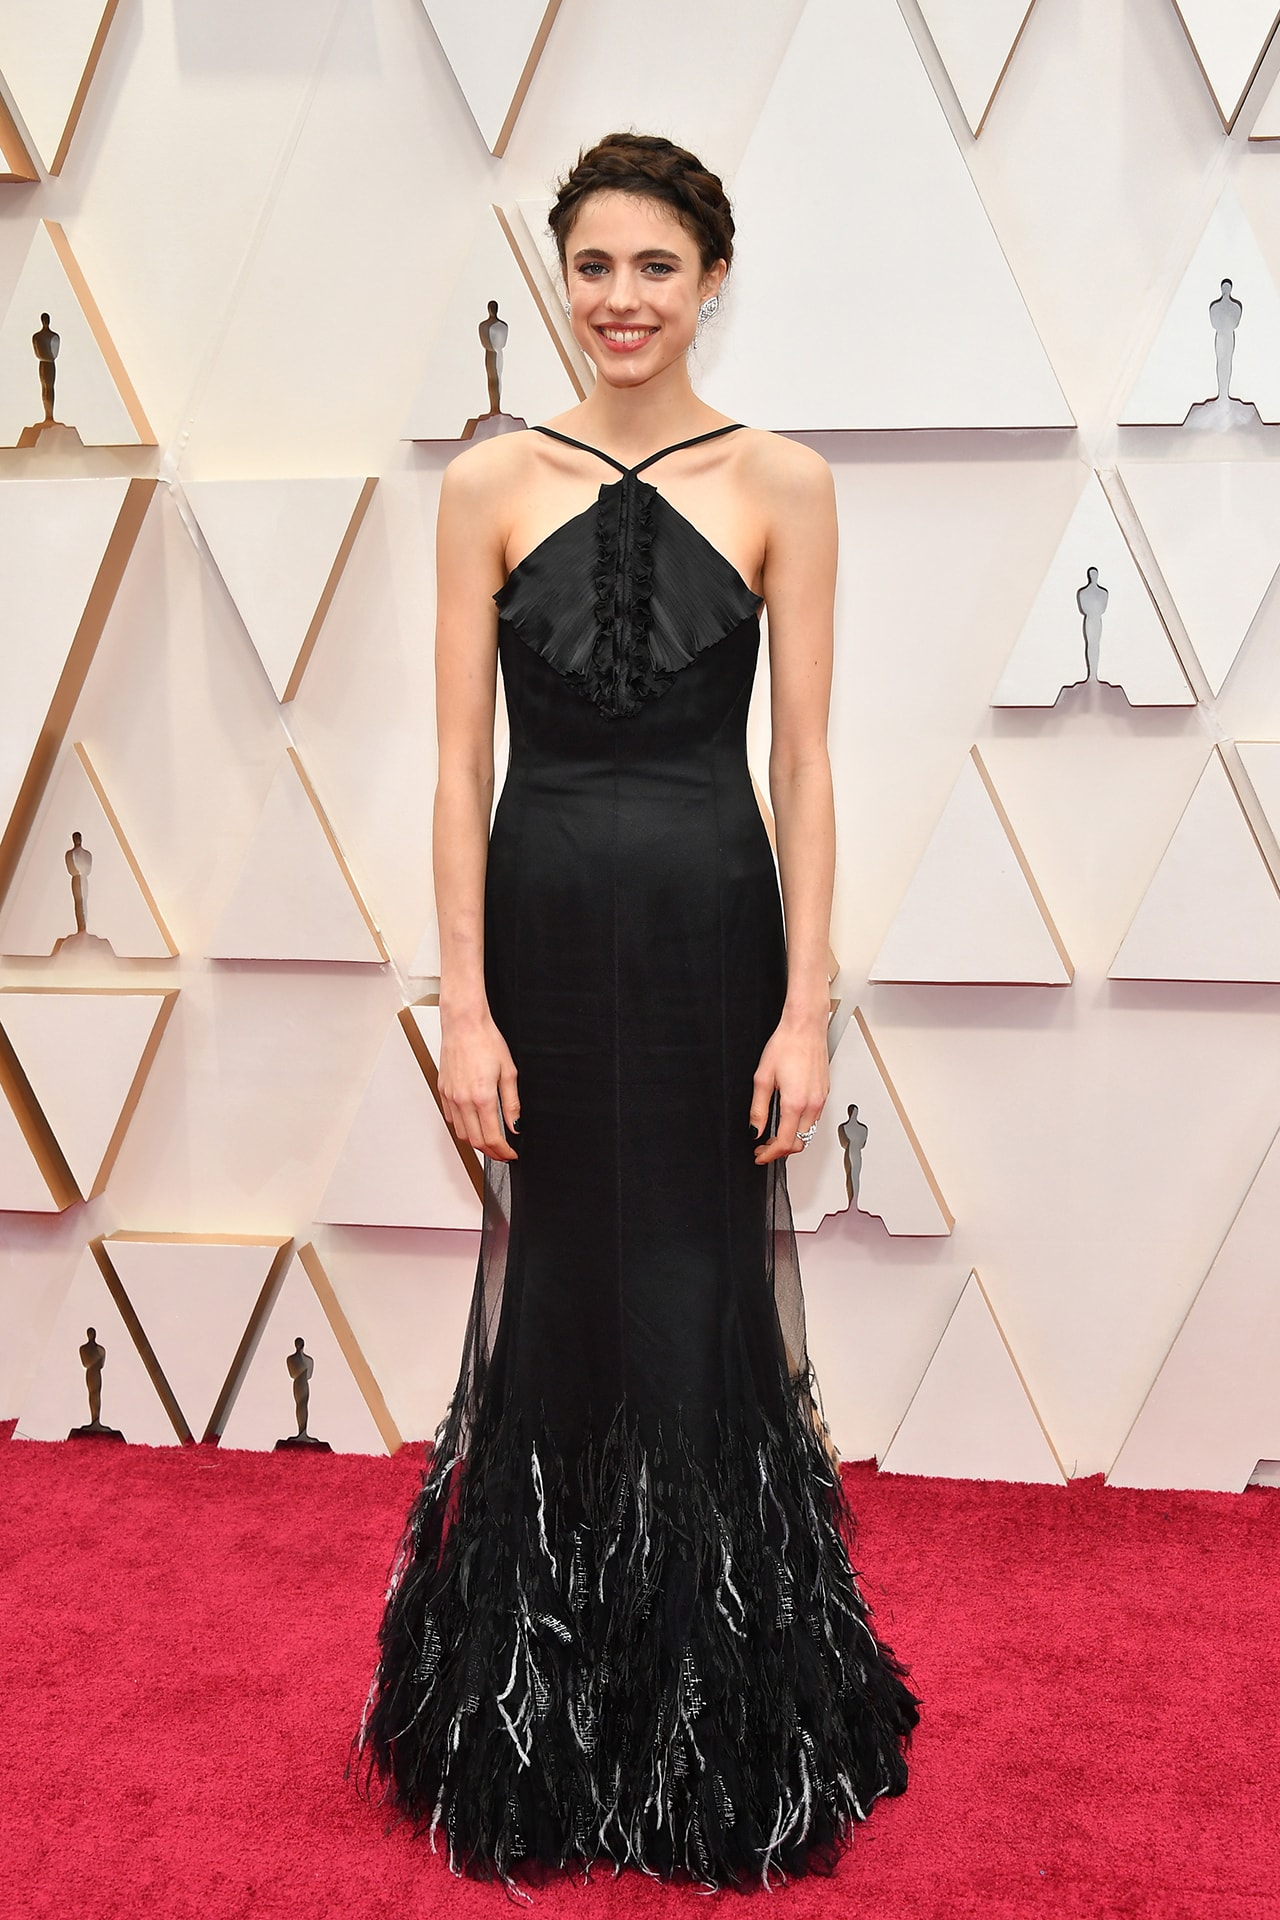 Margaret Qualley Black Dress Oscars Red Carpet 92nd Annual Academy Awards